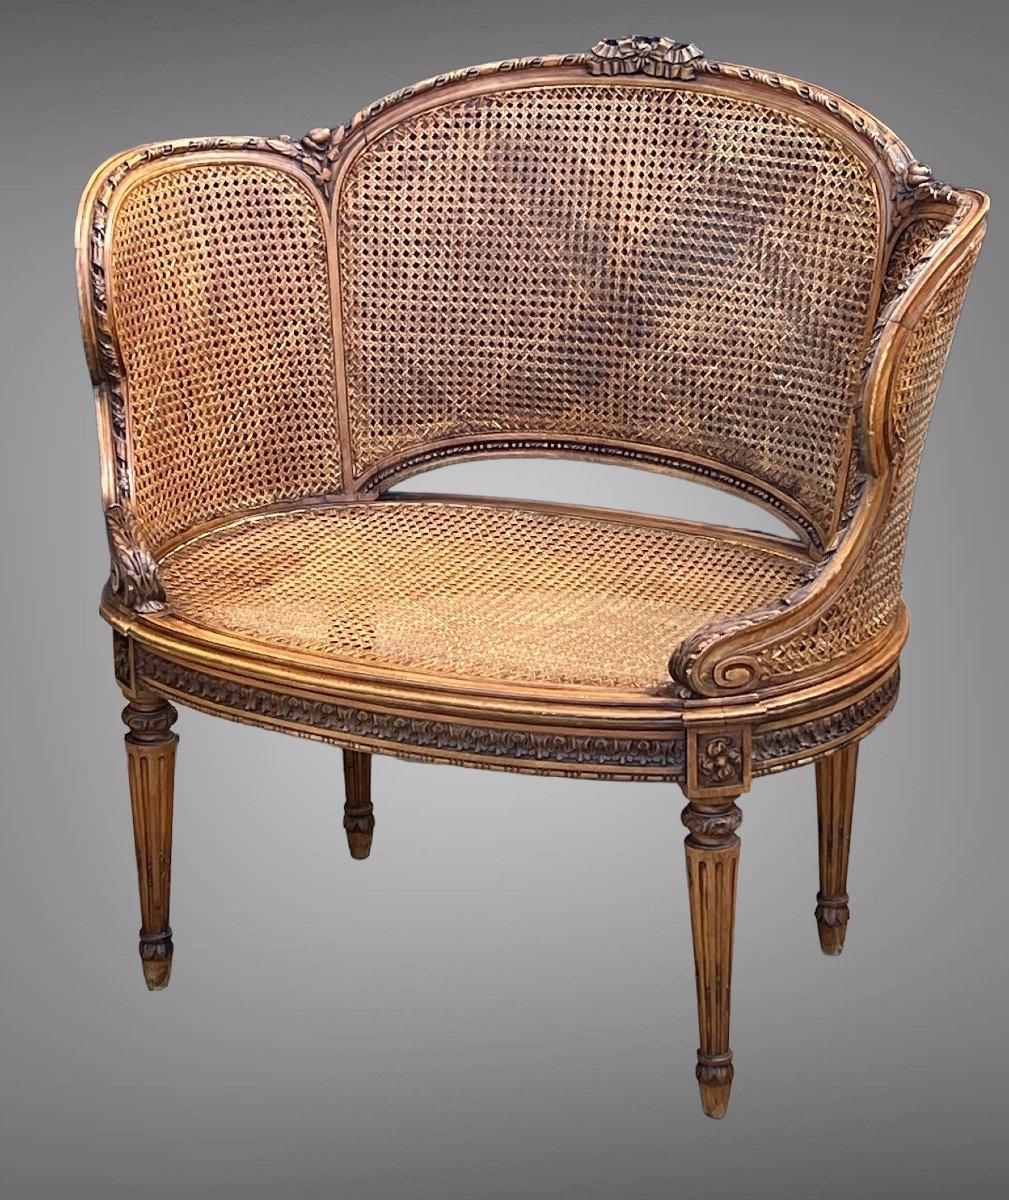 Pair Of Large And Wide Walnut Cane Armchairs From The 19th Century In Louis XVI Style-photo-1